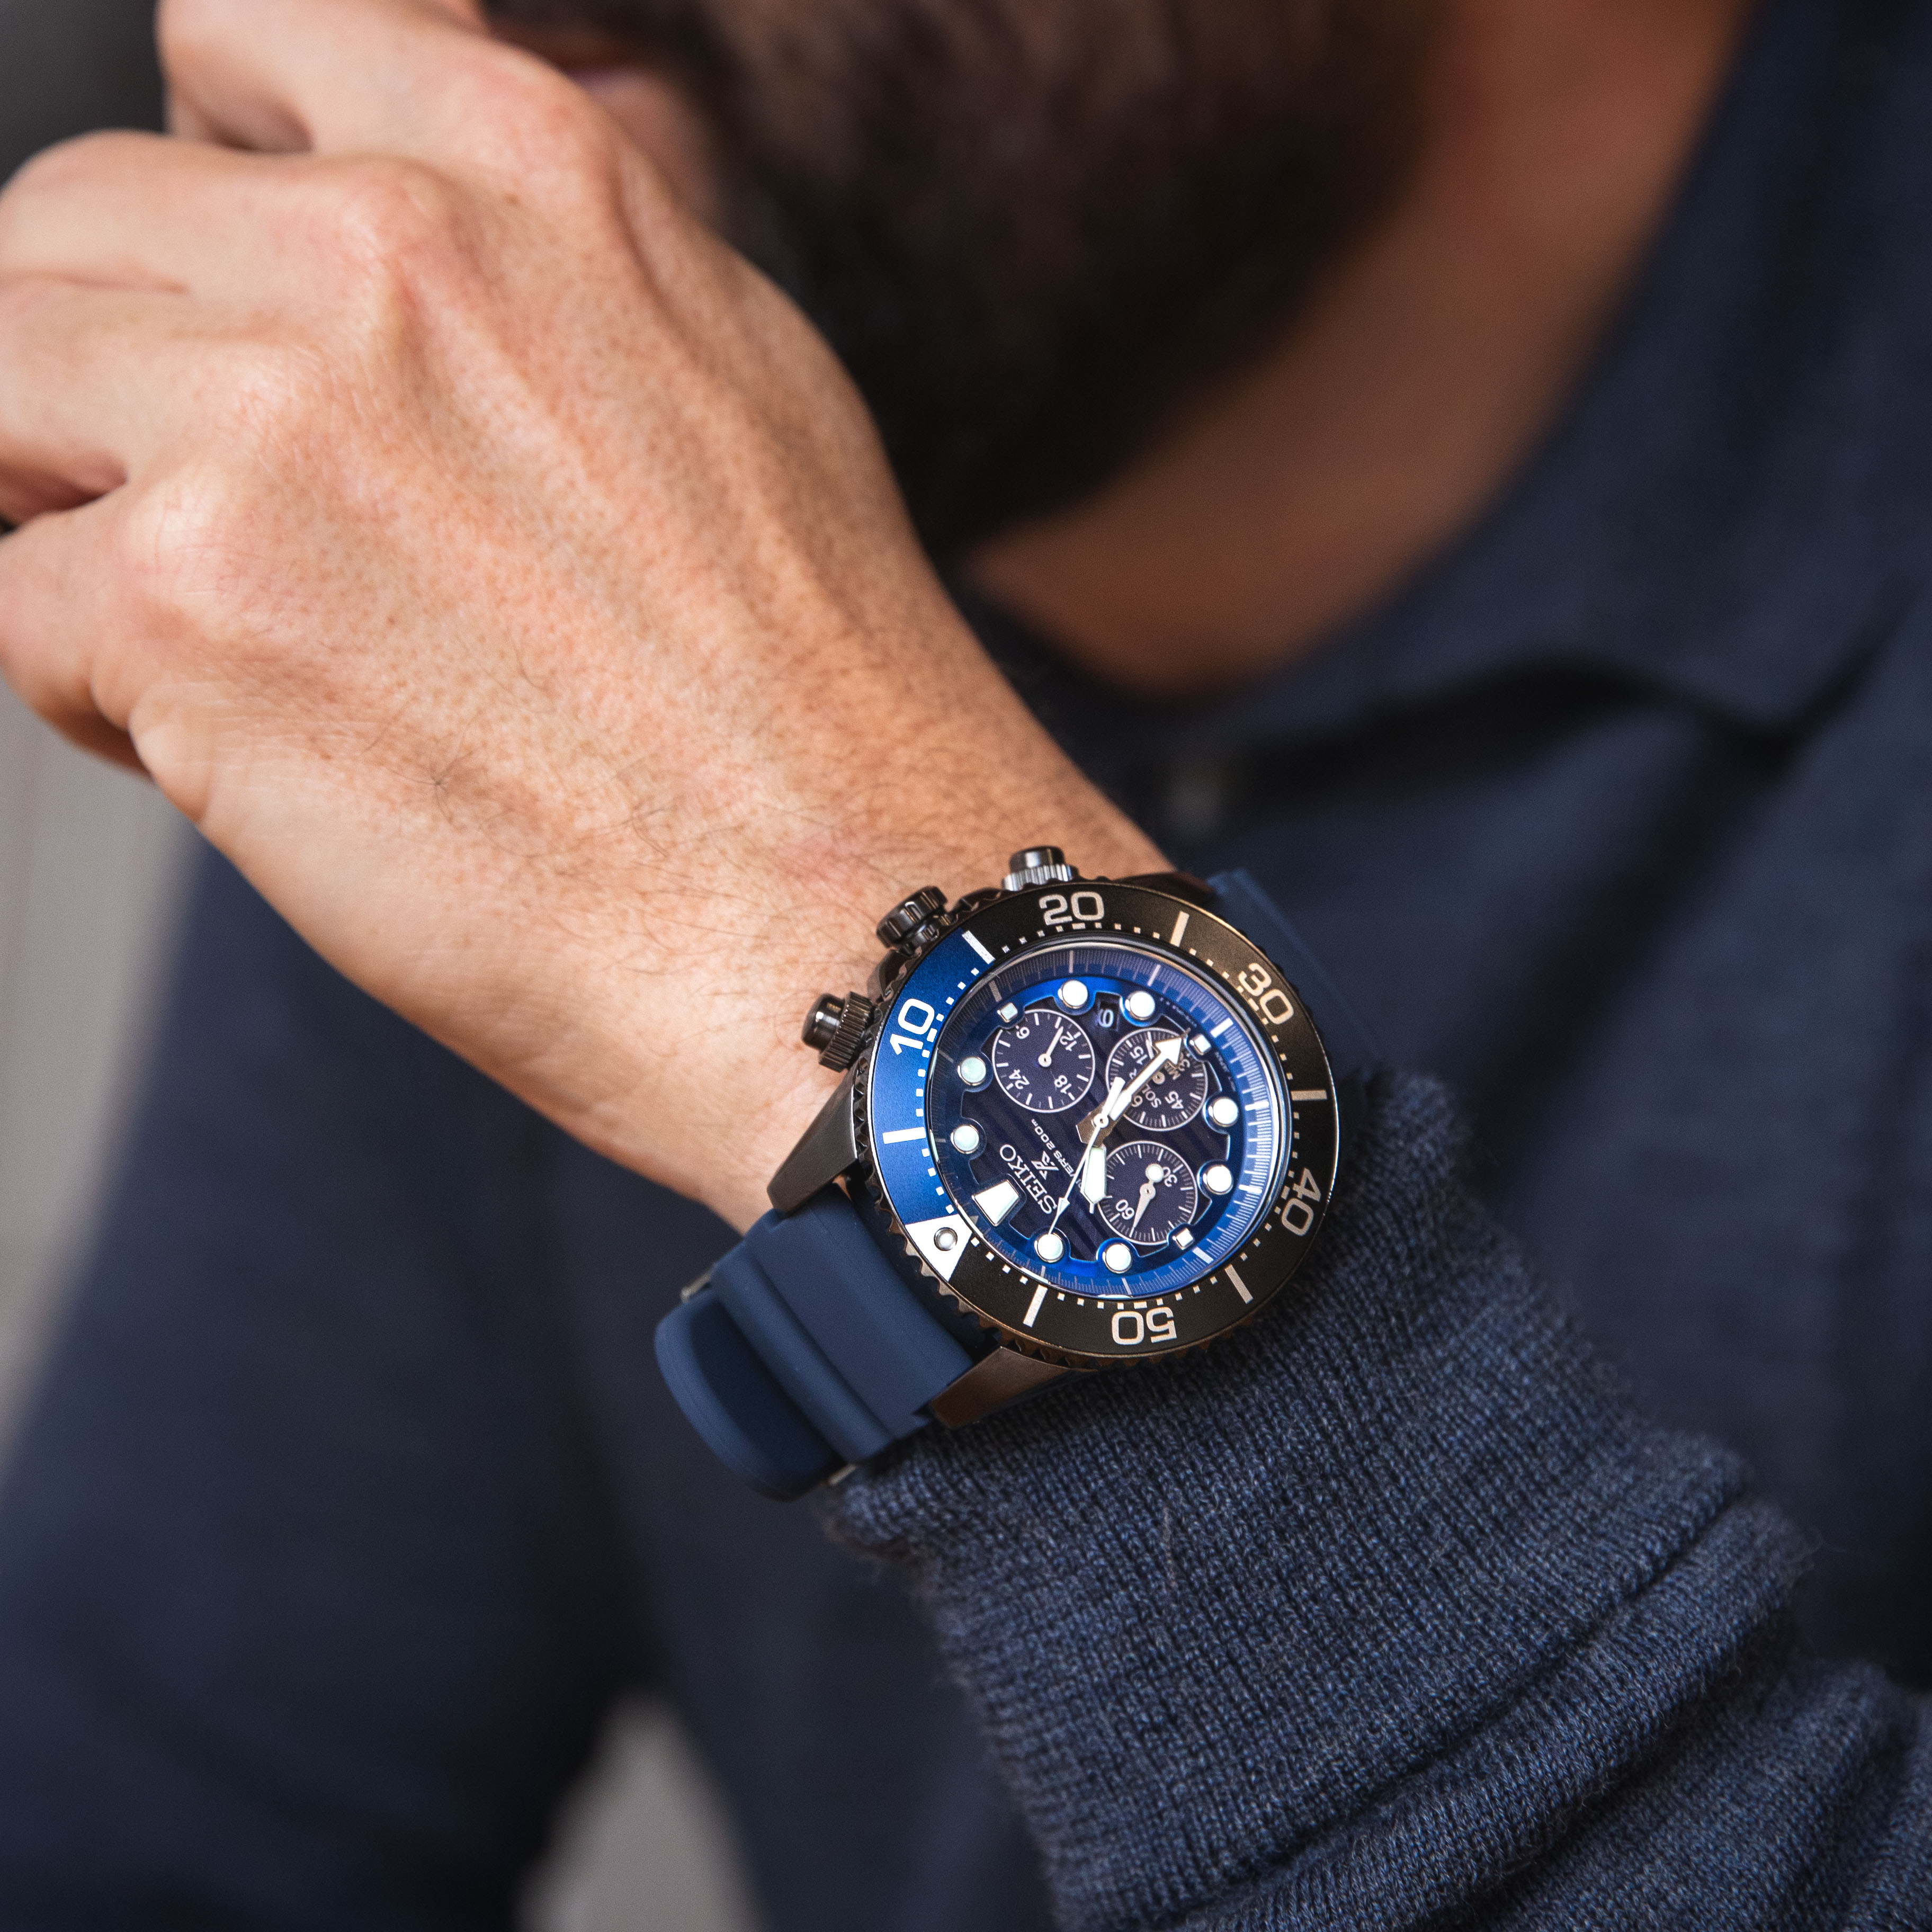 Seiko Prospex SSC701P-9 Special Edition 'Save the Ocean' Divers Watches